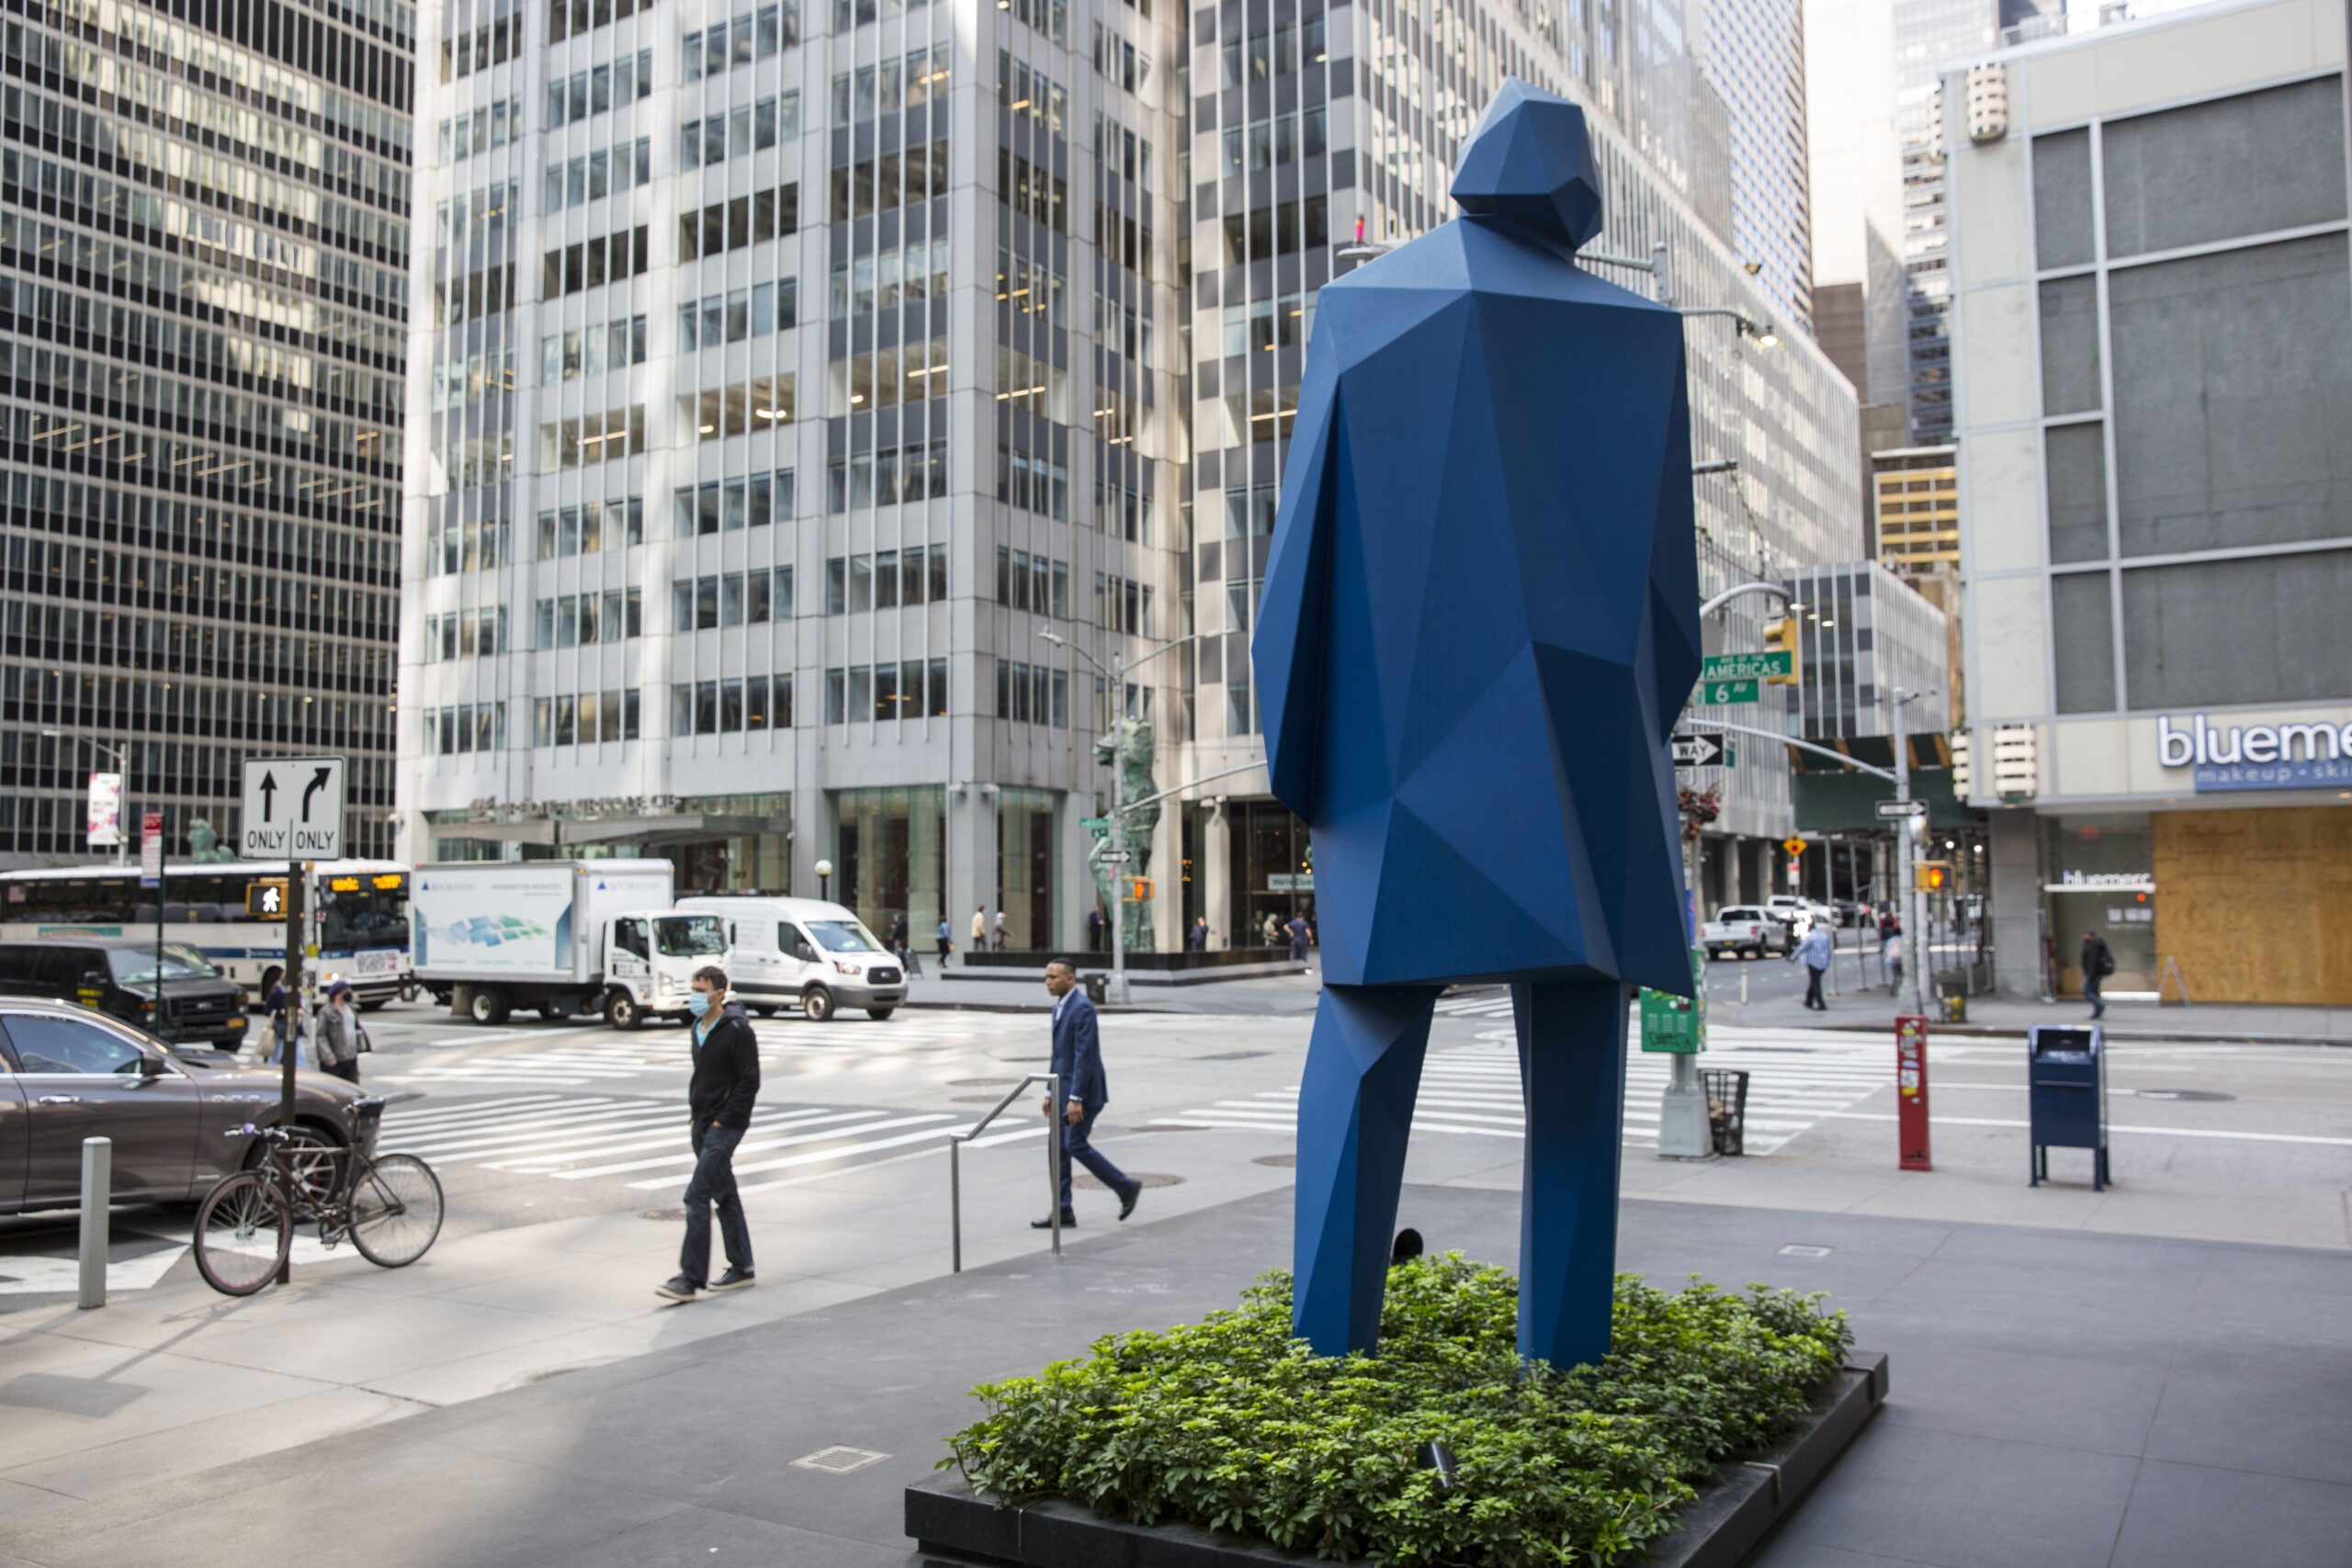 Angular sculpture of a man in blue steel by Xavier Veilhan entitled "Jean-Marc" which stands on 6th Avenue and 53rd Street outside RXR Realty offices a half block from the Museum of Modern Art. David Grossman / Alamy Stock Photo